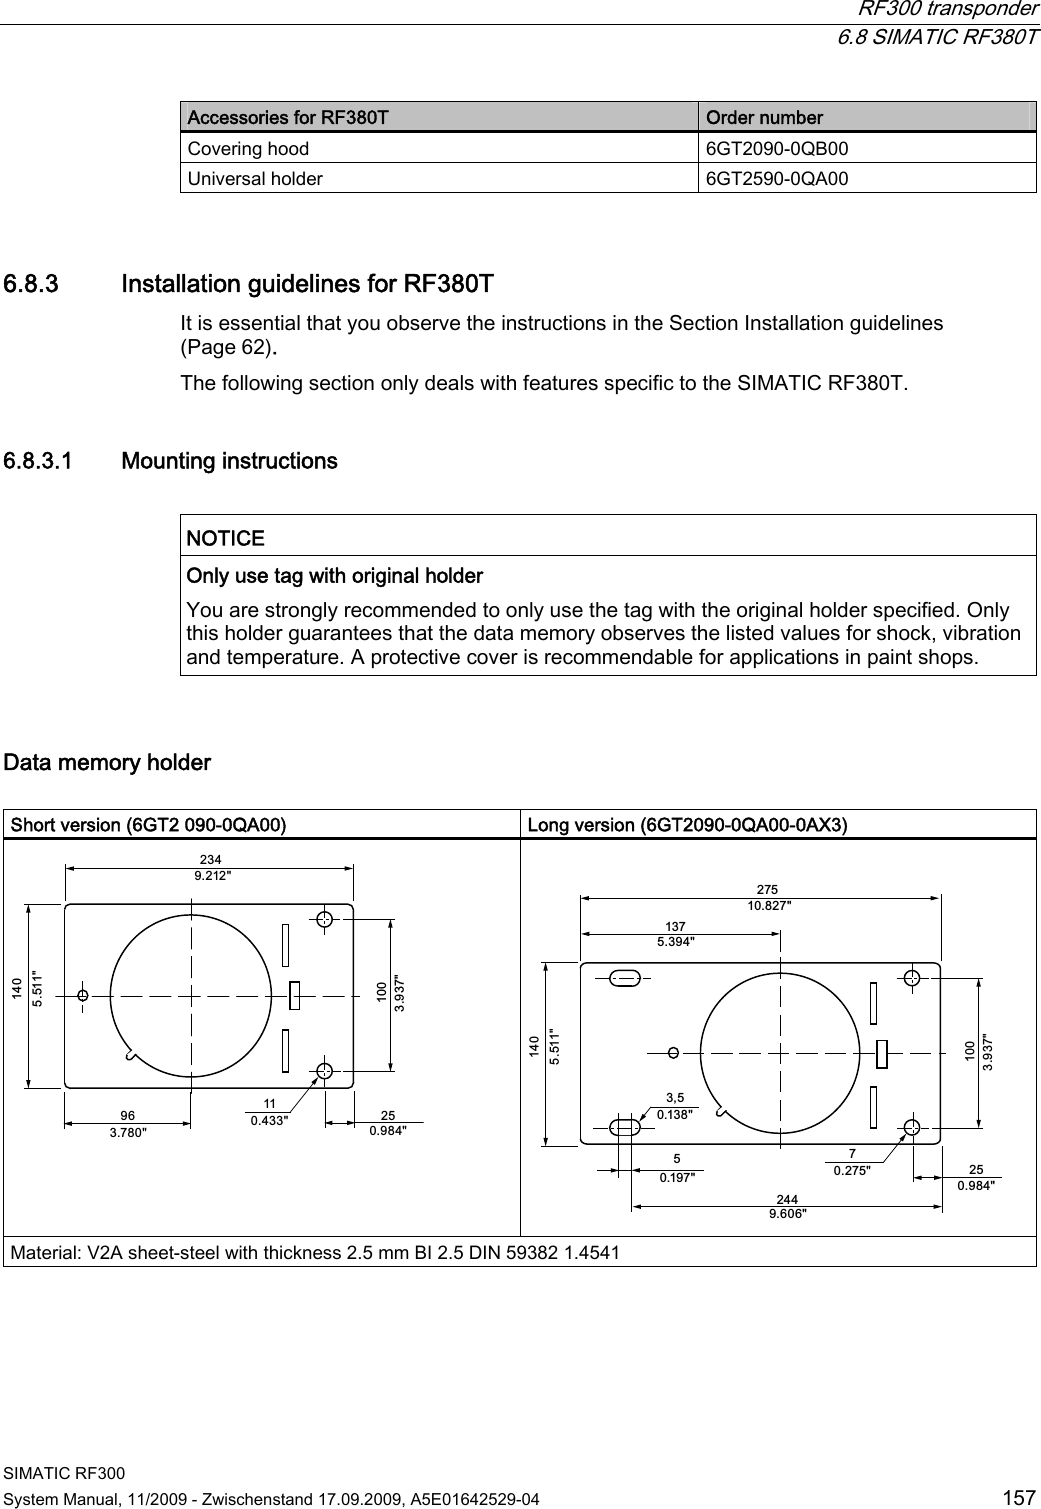  RF300 transponder  6.8 SIMATIC RF380T SIMATIC RF300 System Manual, 11/2009 - Zwischenstand 17.09.2009, A5E01642529-04  157 Accessories for RF380T  Order number Covering hood  6GT2090-0QB00 Universal holder  6GT2590-0QA00 6.8.3 Installation guidelines for RF380T It is essential that you observe the instructions in the Section Installation guidelines (Page 62). The following section only deals with features specific to the SIMATIC RF380T. 6.8.3.1 Mounting instructions  NOTICE  Only use tag with original holder You are strongly recommended to only use the tag with the original holder specified. Only this holder guarantees that the data memory observes the listed values for shock, vibration and temperature. A protective cover is recommendable for applications in paint shops.  Data memory holder  Short version (6GT2 090-0QA00)  Long version (6GT2090-0QA00-0AX3)    Material: V2A sheet-steel with thickness 2.5 mm BI 2.5 DIN 59382 1.4541 